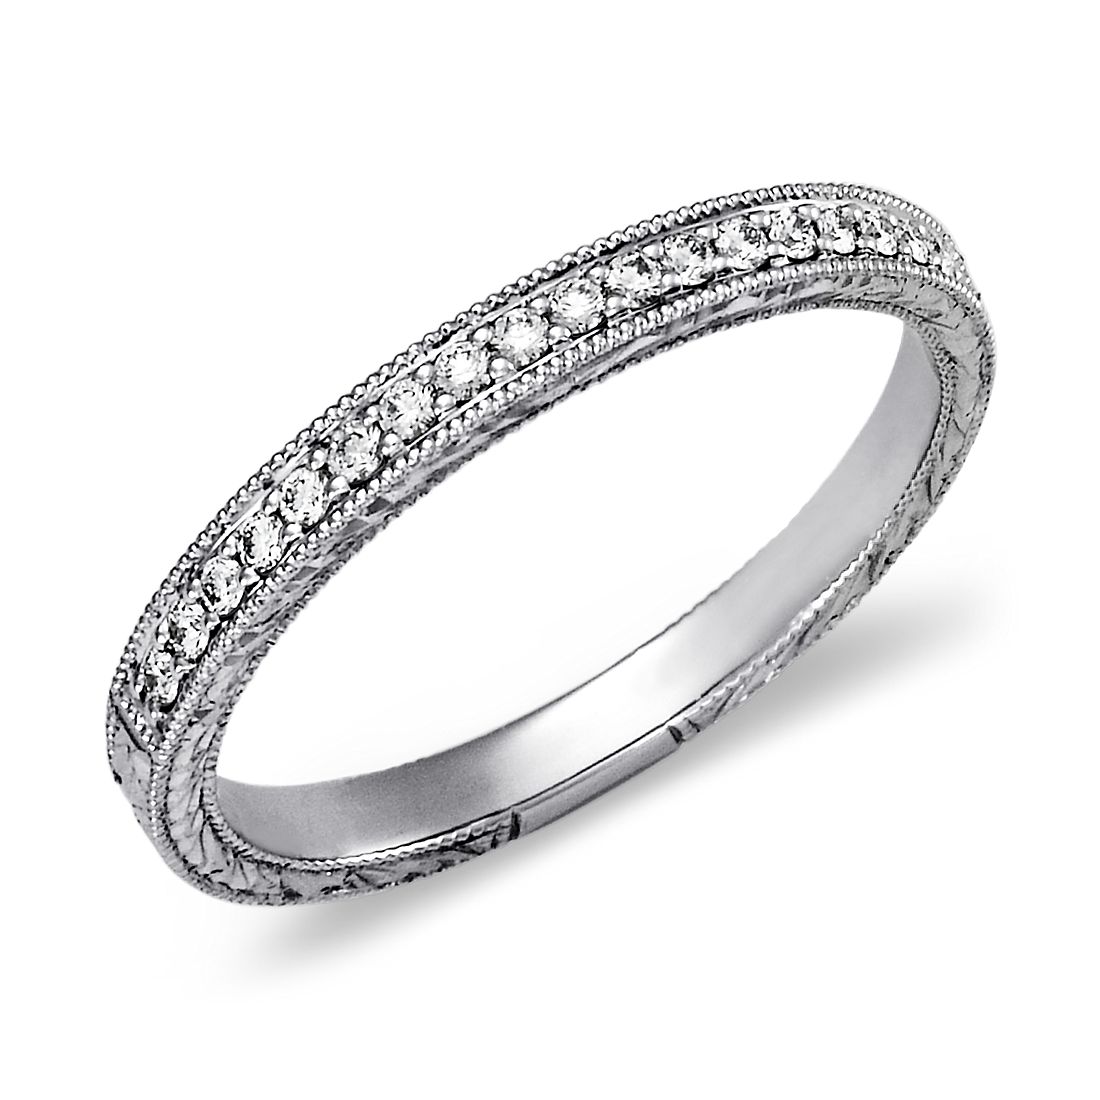 Hand-Engraved Micropavé Diamond Ring in Platinum (1/8 ct. tw.)